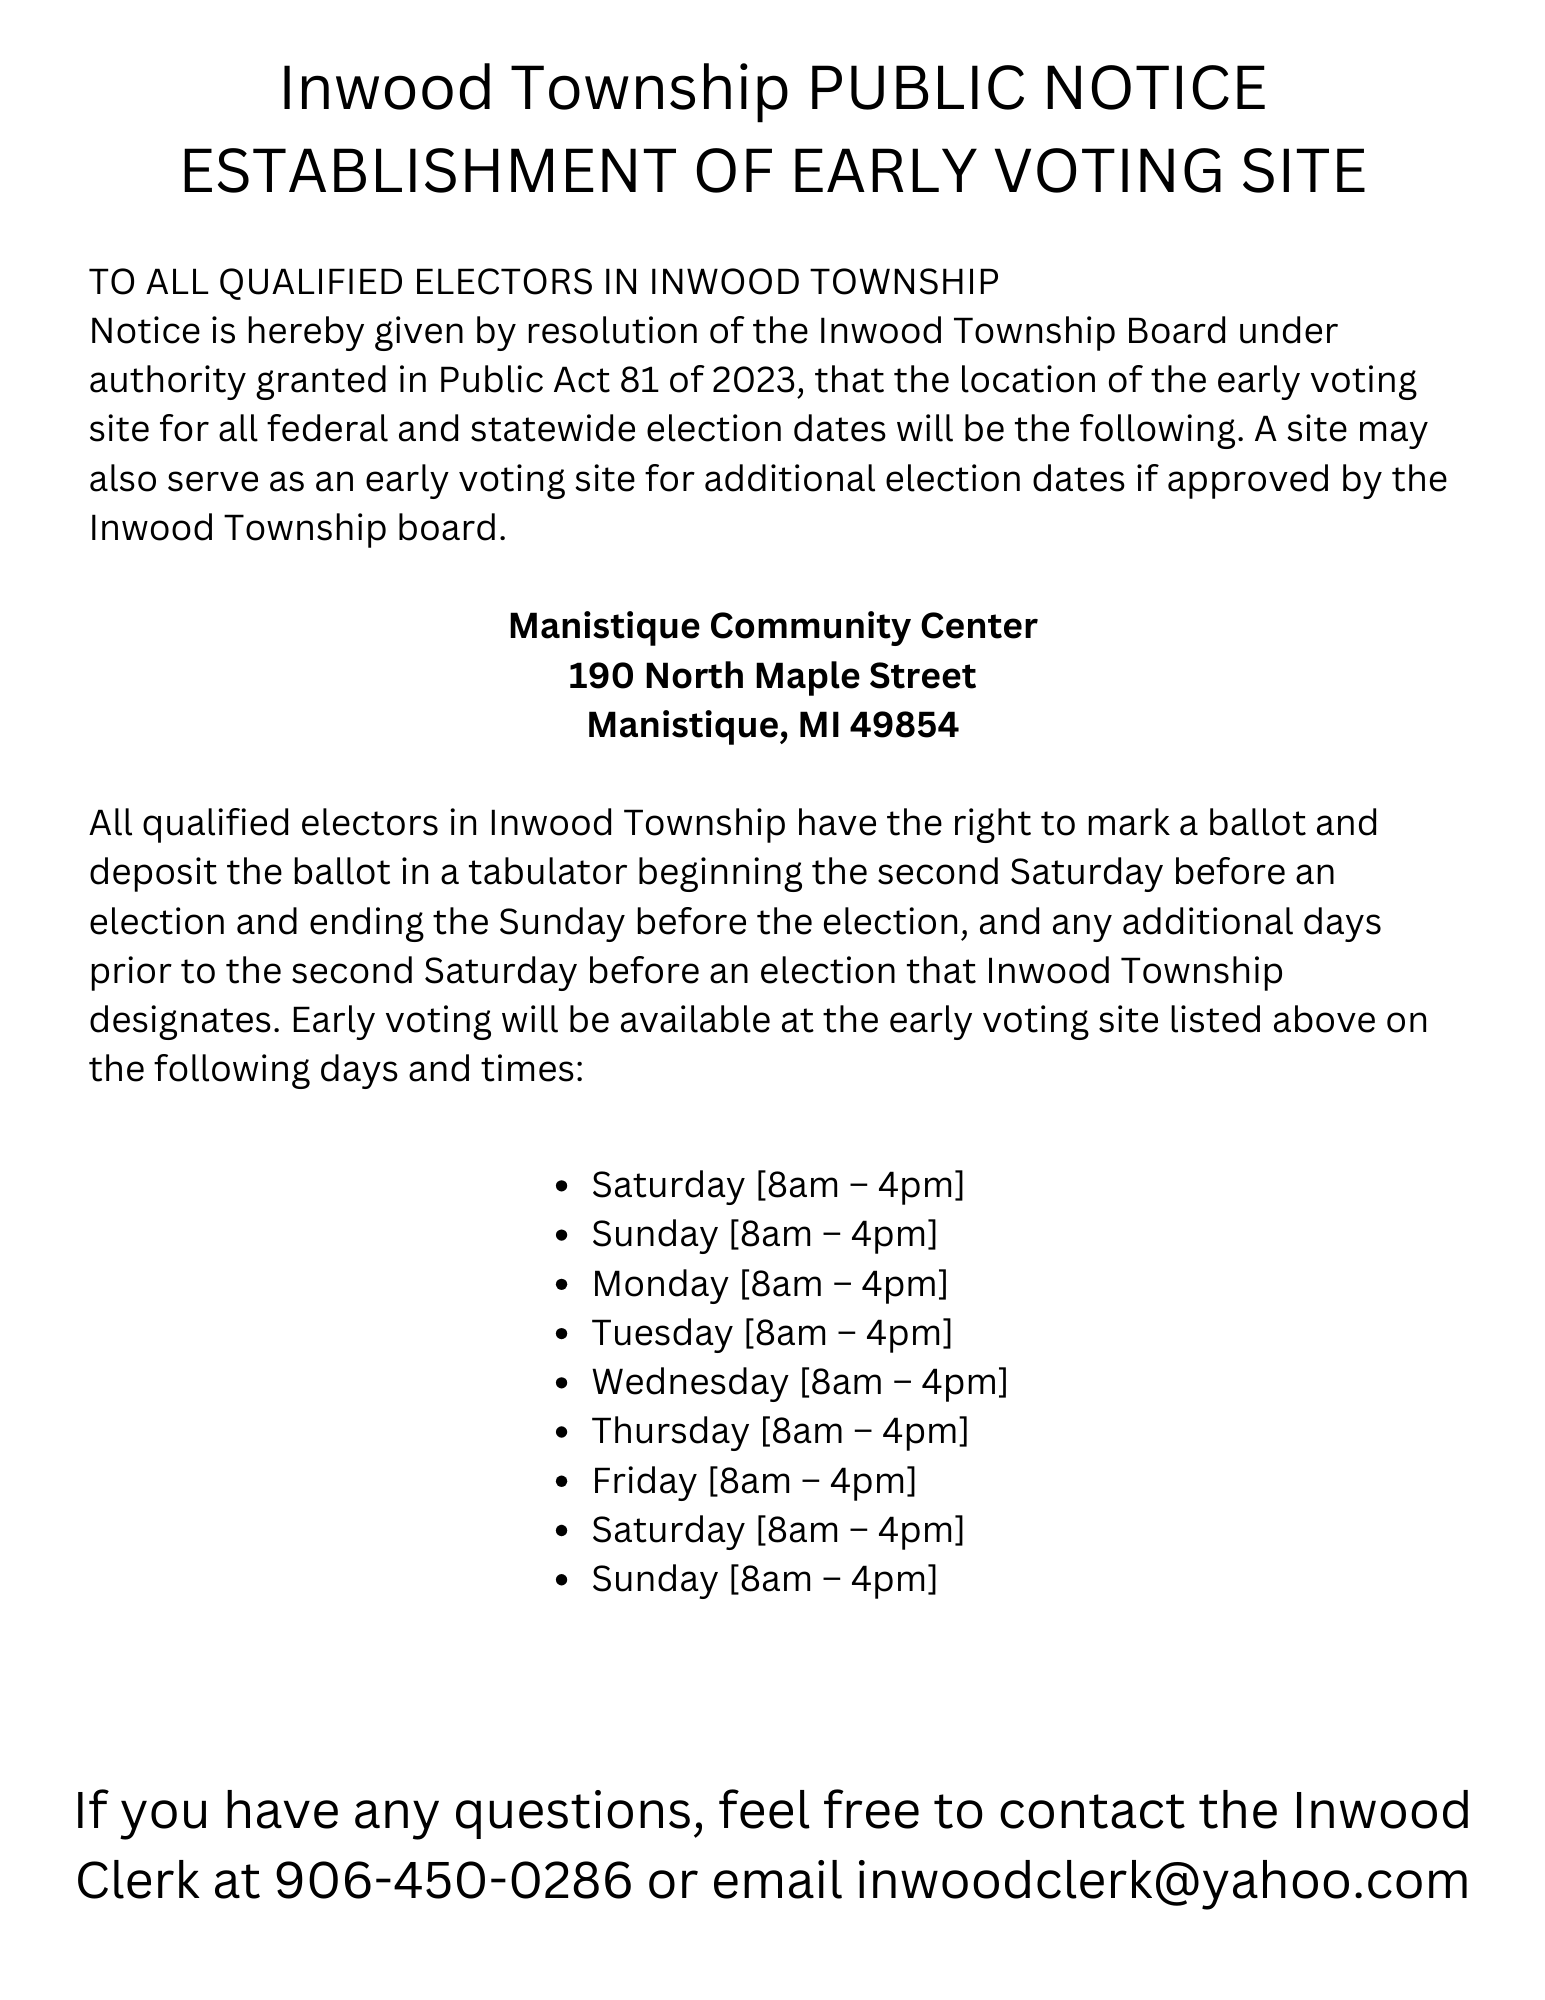 Early voting site announcement